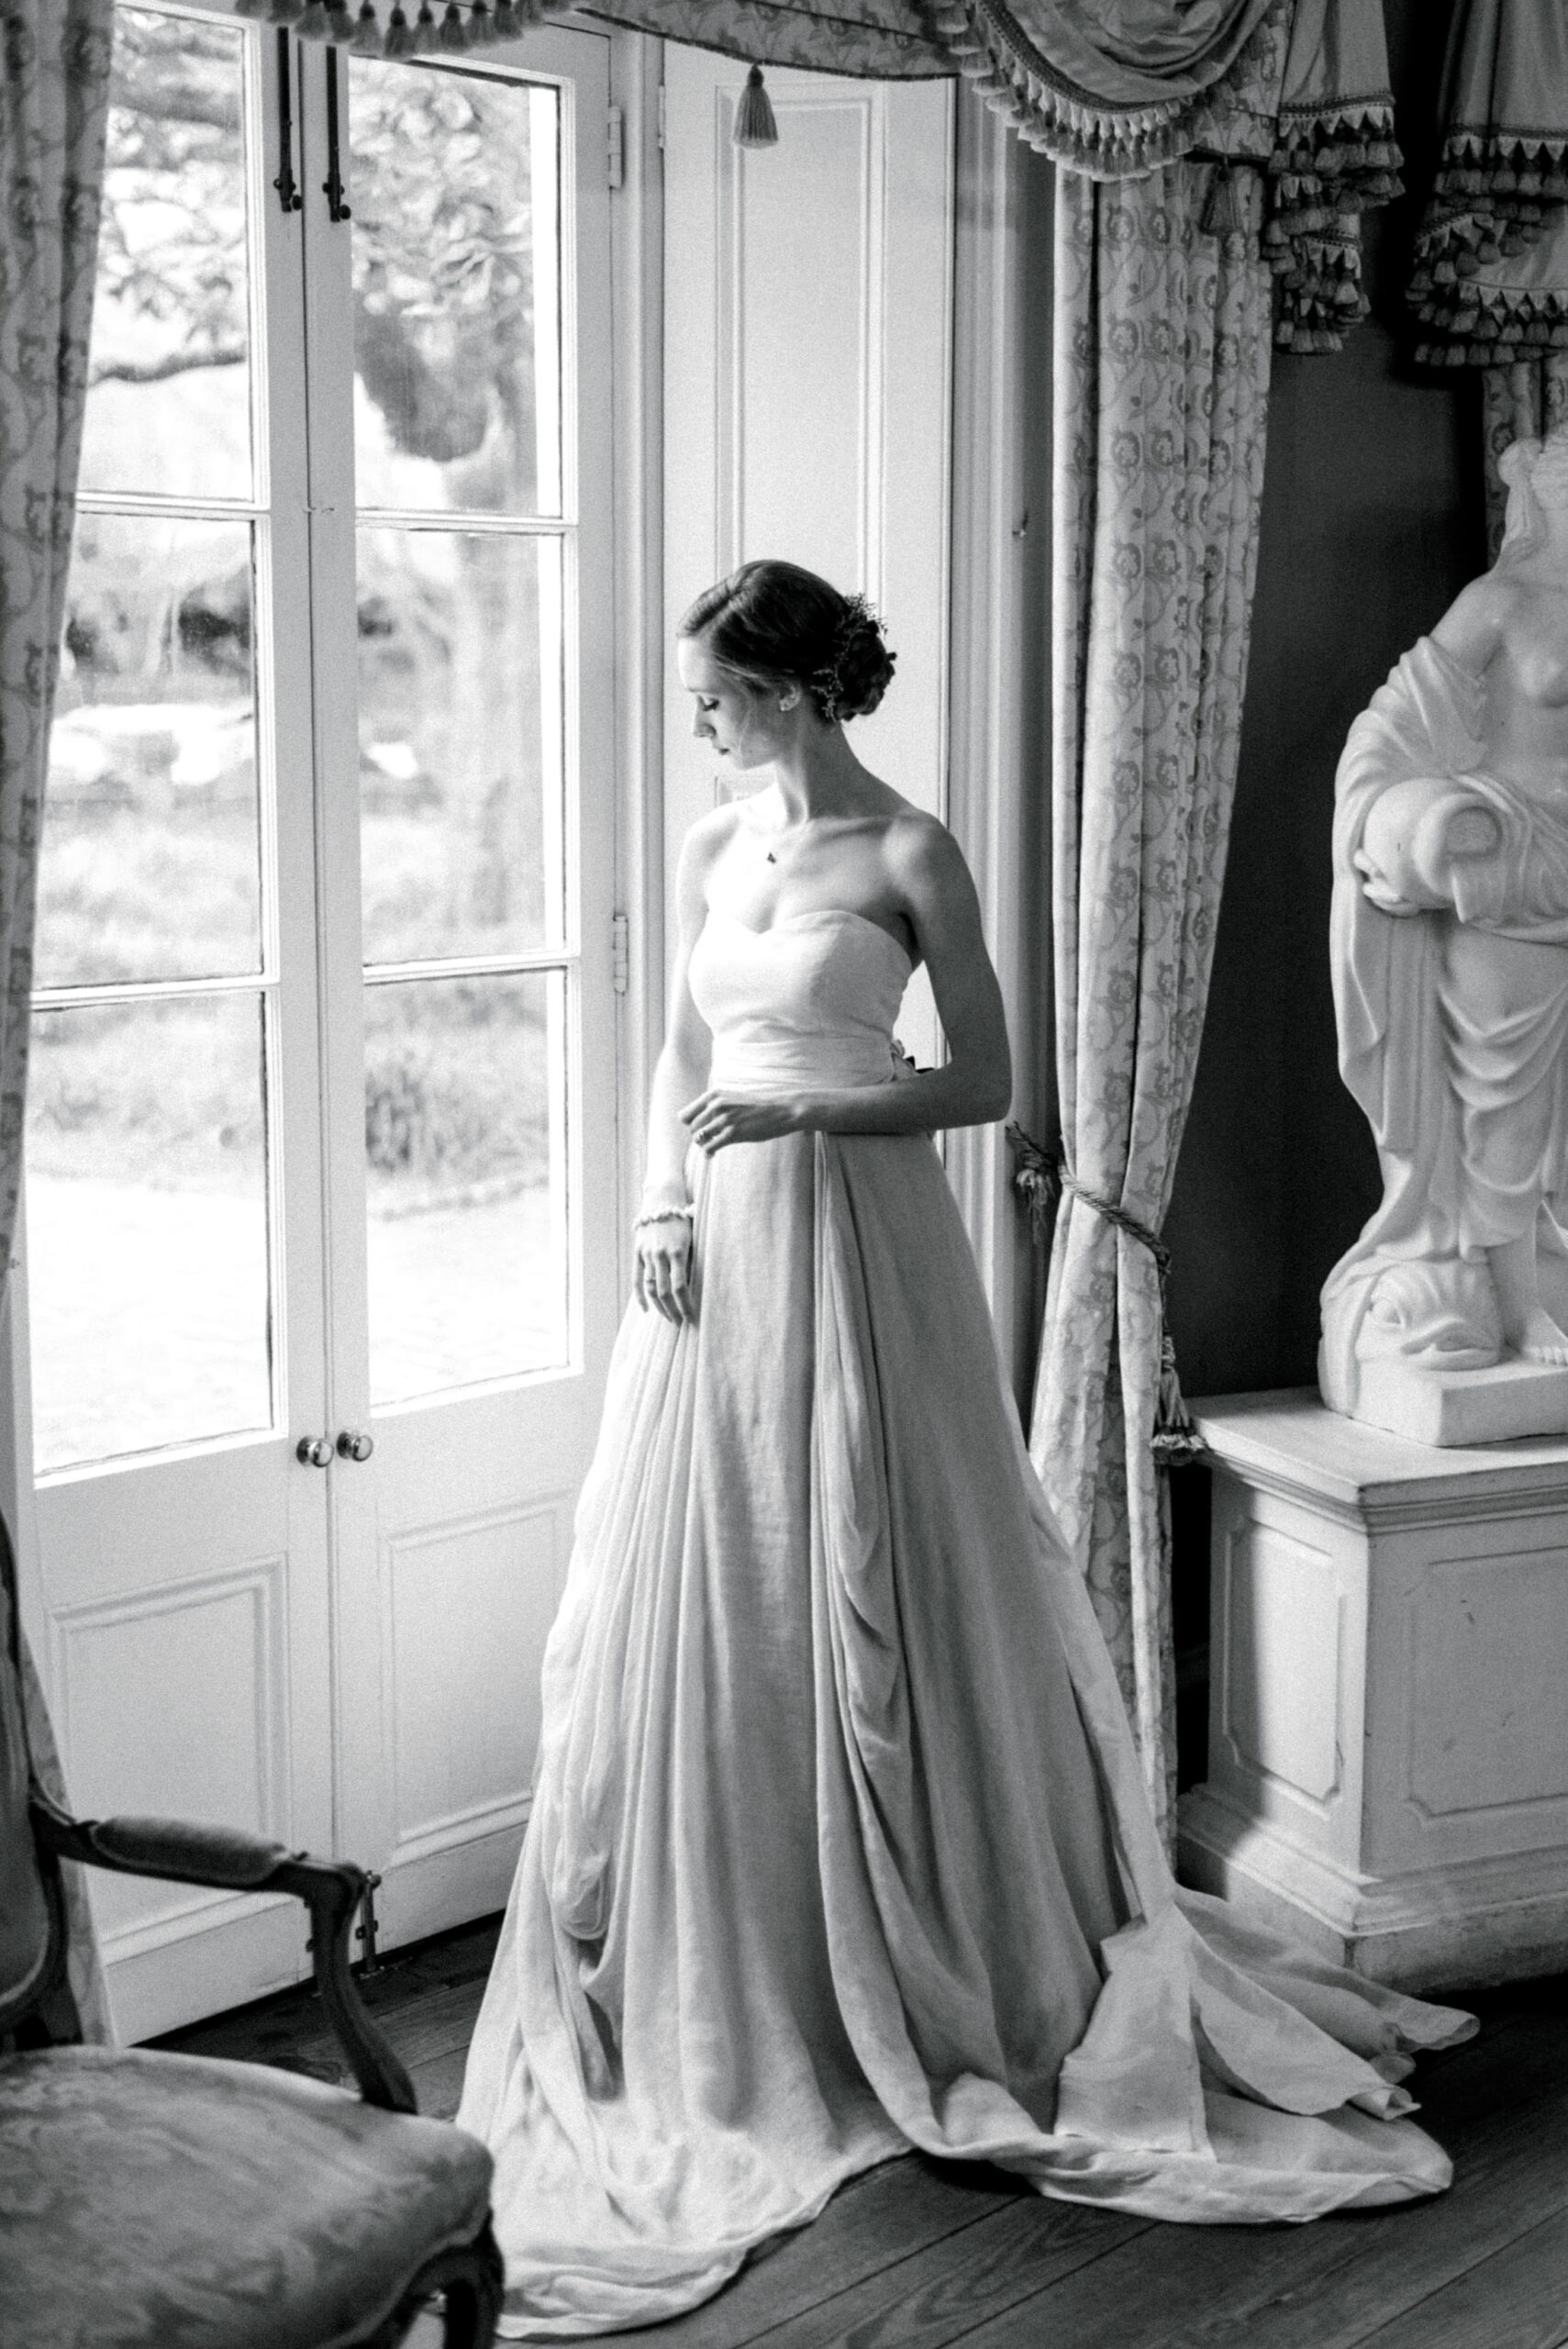 The black and white image shows a beautiful bride standing inside the William Aiken House. She is wearing a strapless corset top and a blush-colored wedding skirt that flows down to the floor. The corset top is fitted to her body, accentuating her curves, while the skirt has a soft and delicate texture, adding a touch of elegance to her appearance. The bride stands confidently, with her arms slightly lifted, and her face is turned towards the window, revealing a peaceful and content expression. The black and white effect of the photo adds a classic and timeless feel to the image, highlighting the bride's beauty and poise.